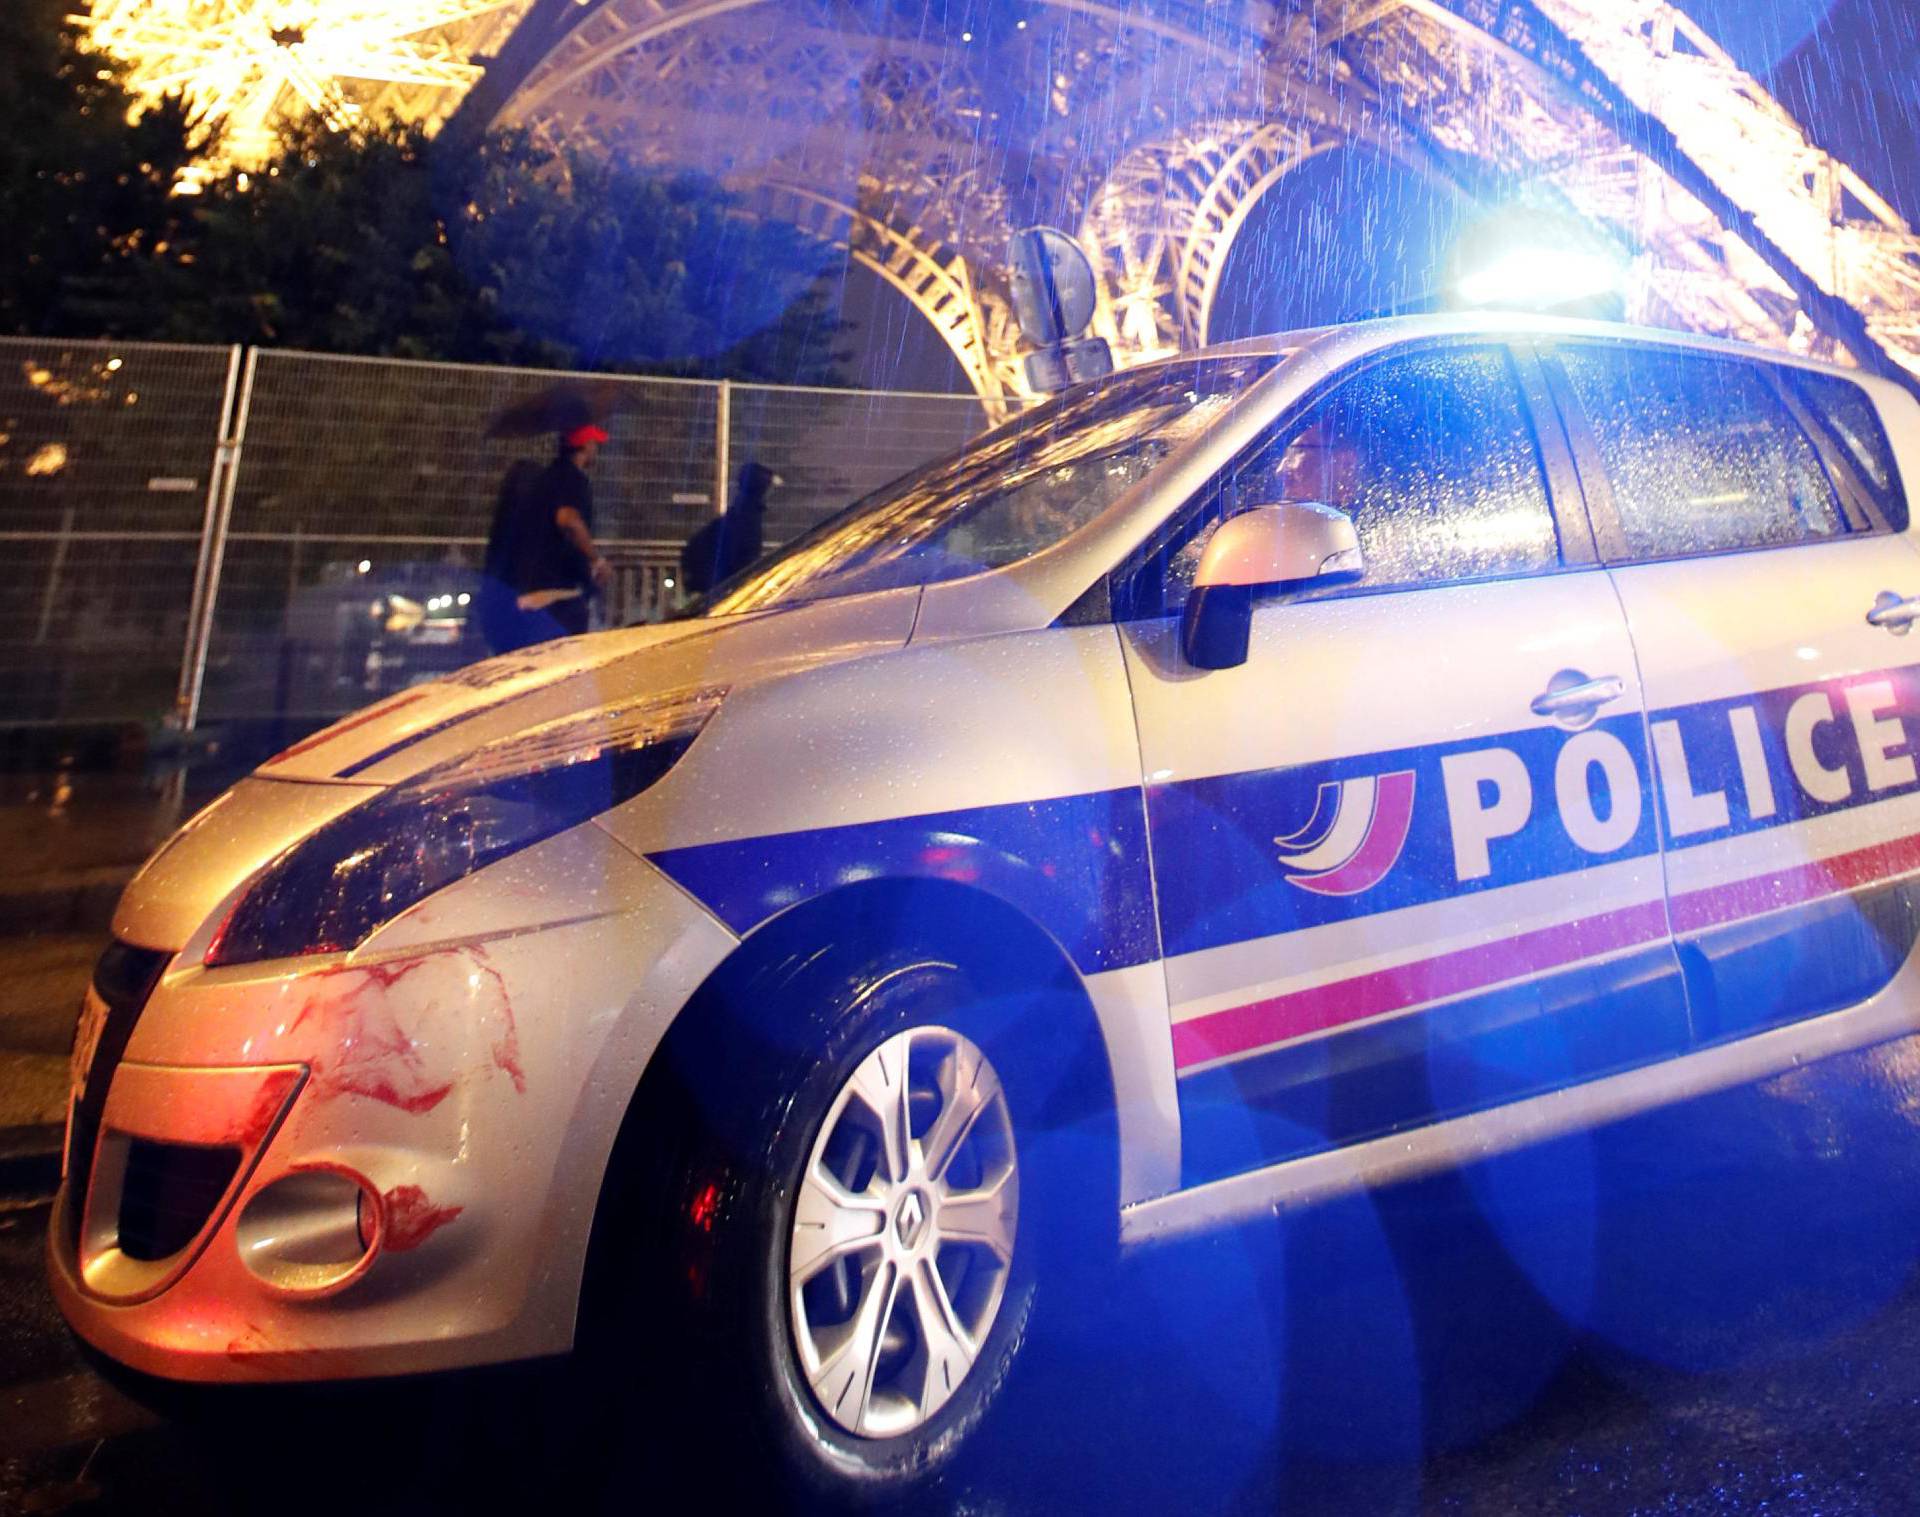 A police car is seen parked in front of the Eiffel Tower in Paris